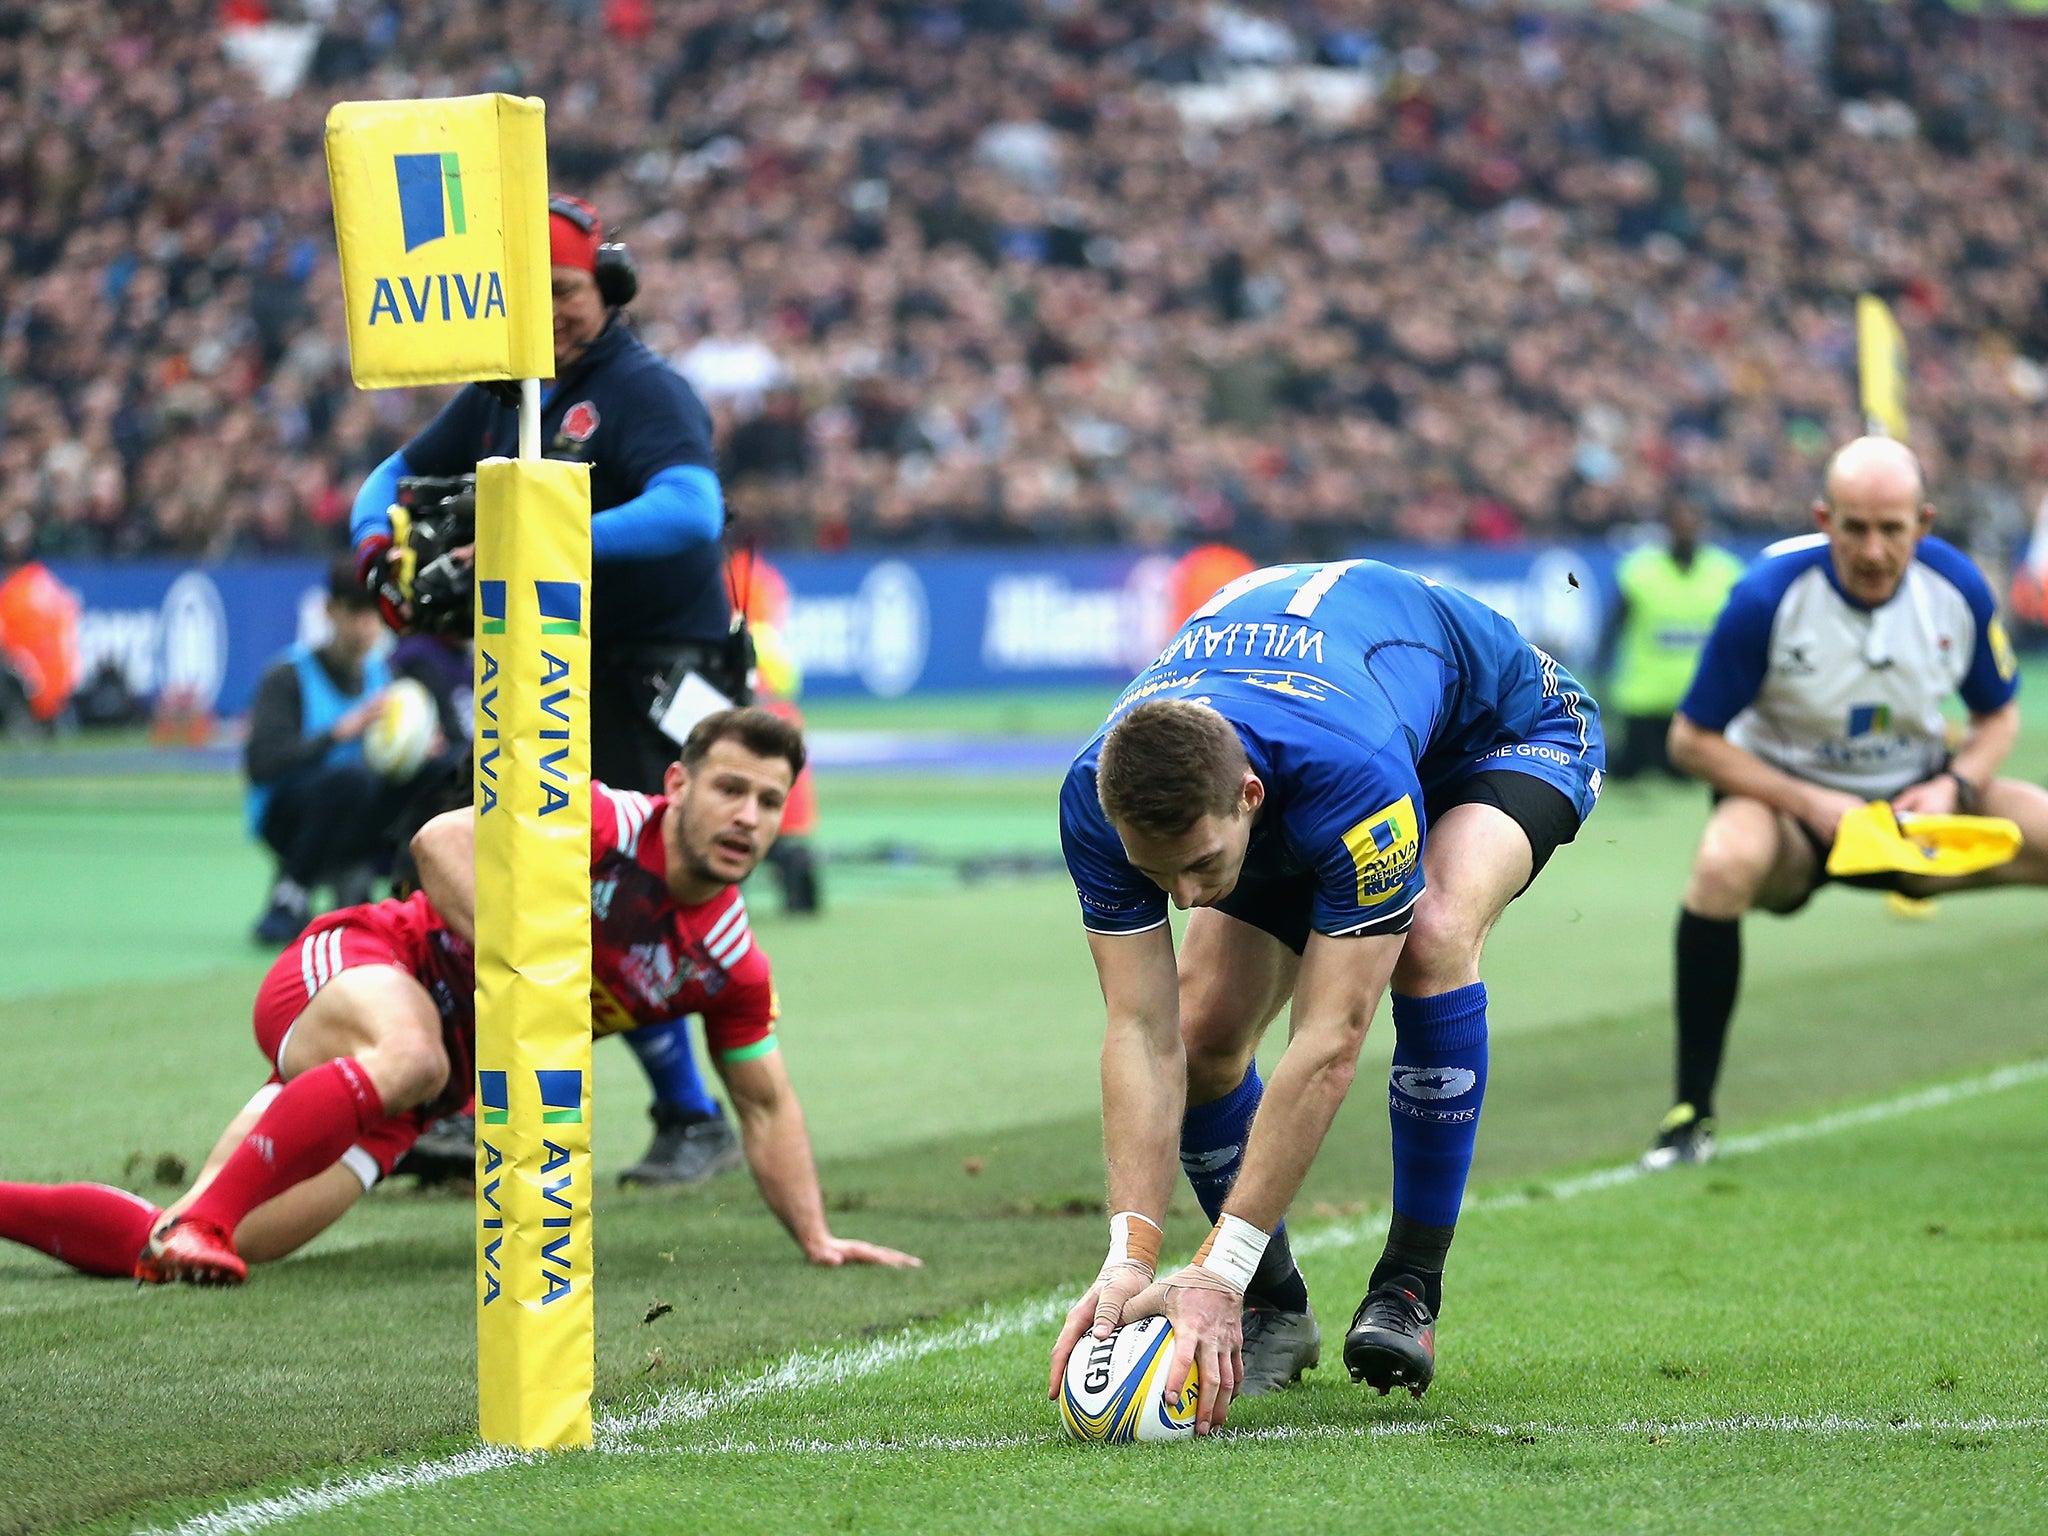 Liam Williams scores the opening try of the match